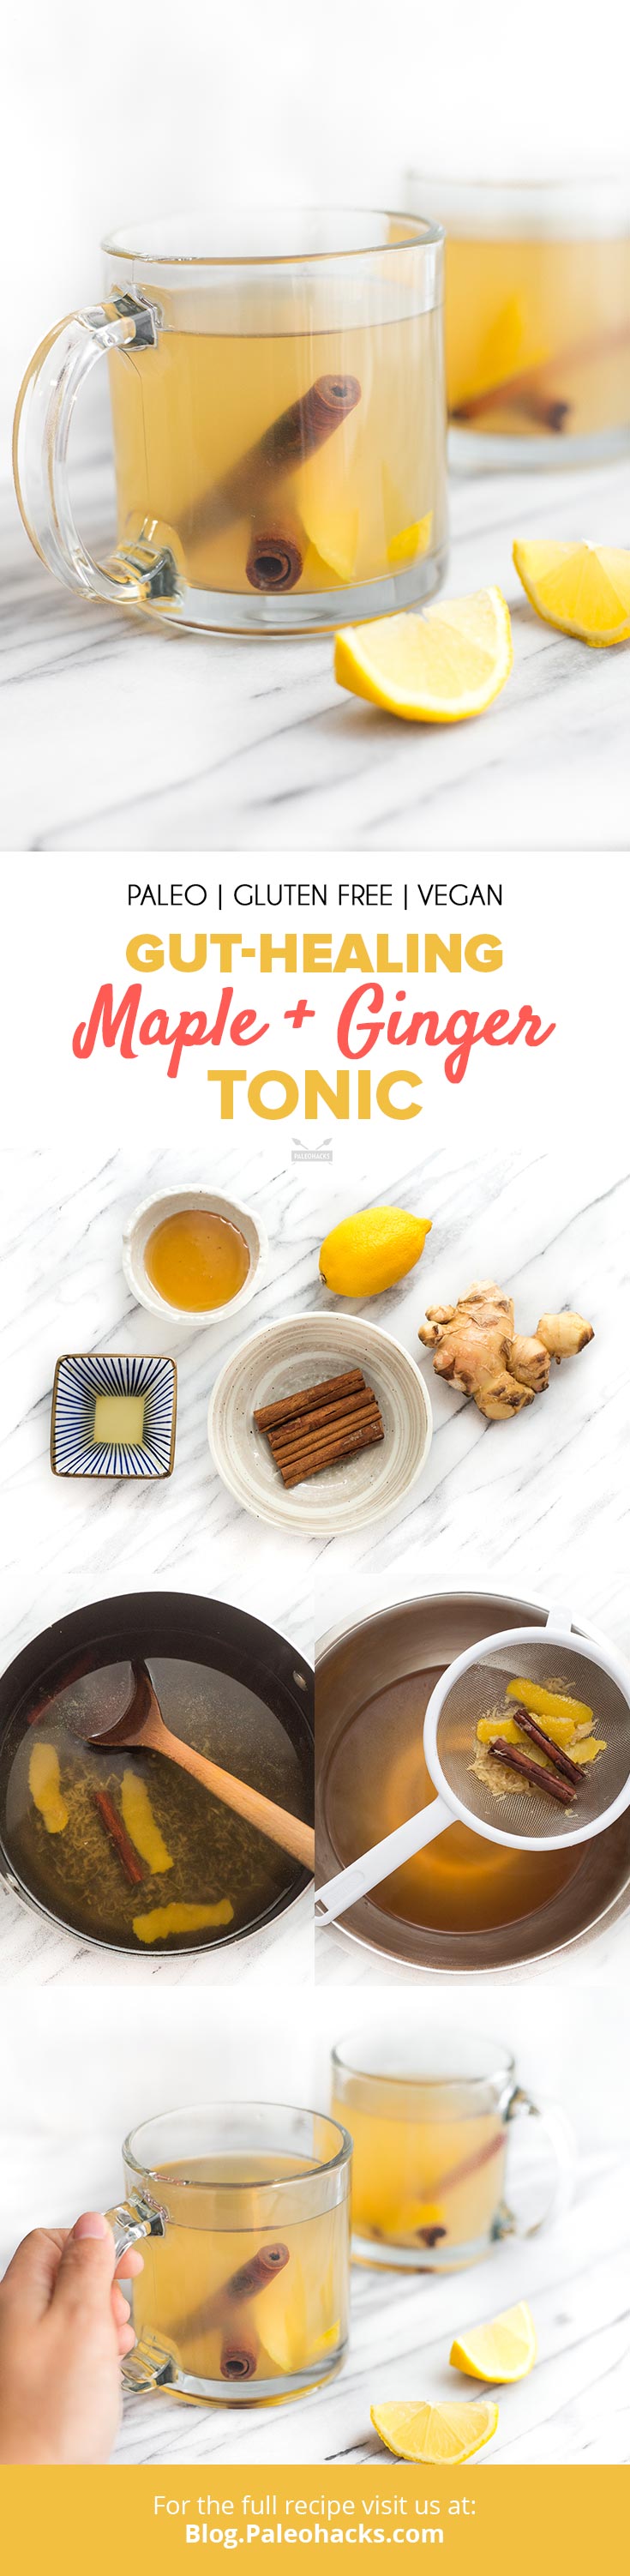 Heal your gut and boost your immunity with this simple tonic infused with maple, ginger, and cinnamon. It's the cure-all drink you need to have handy!